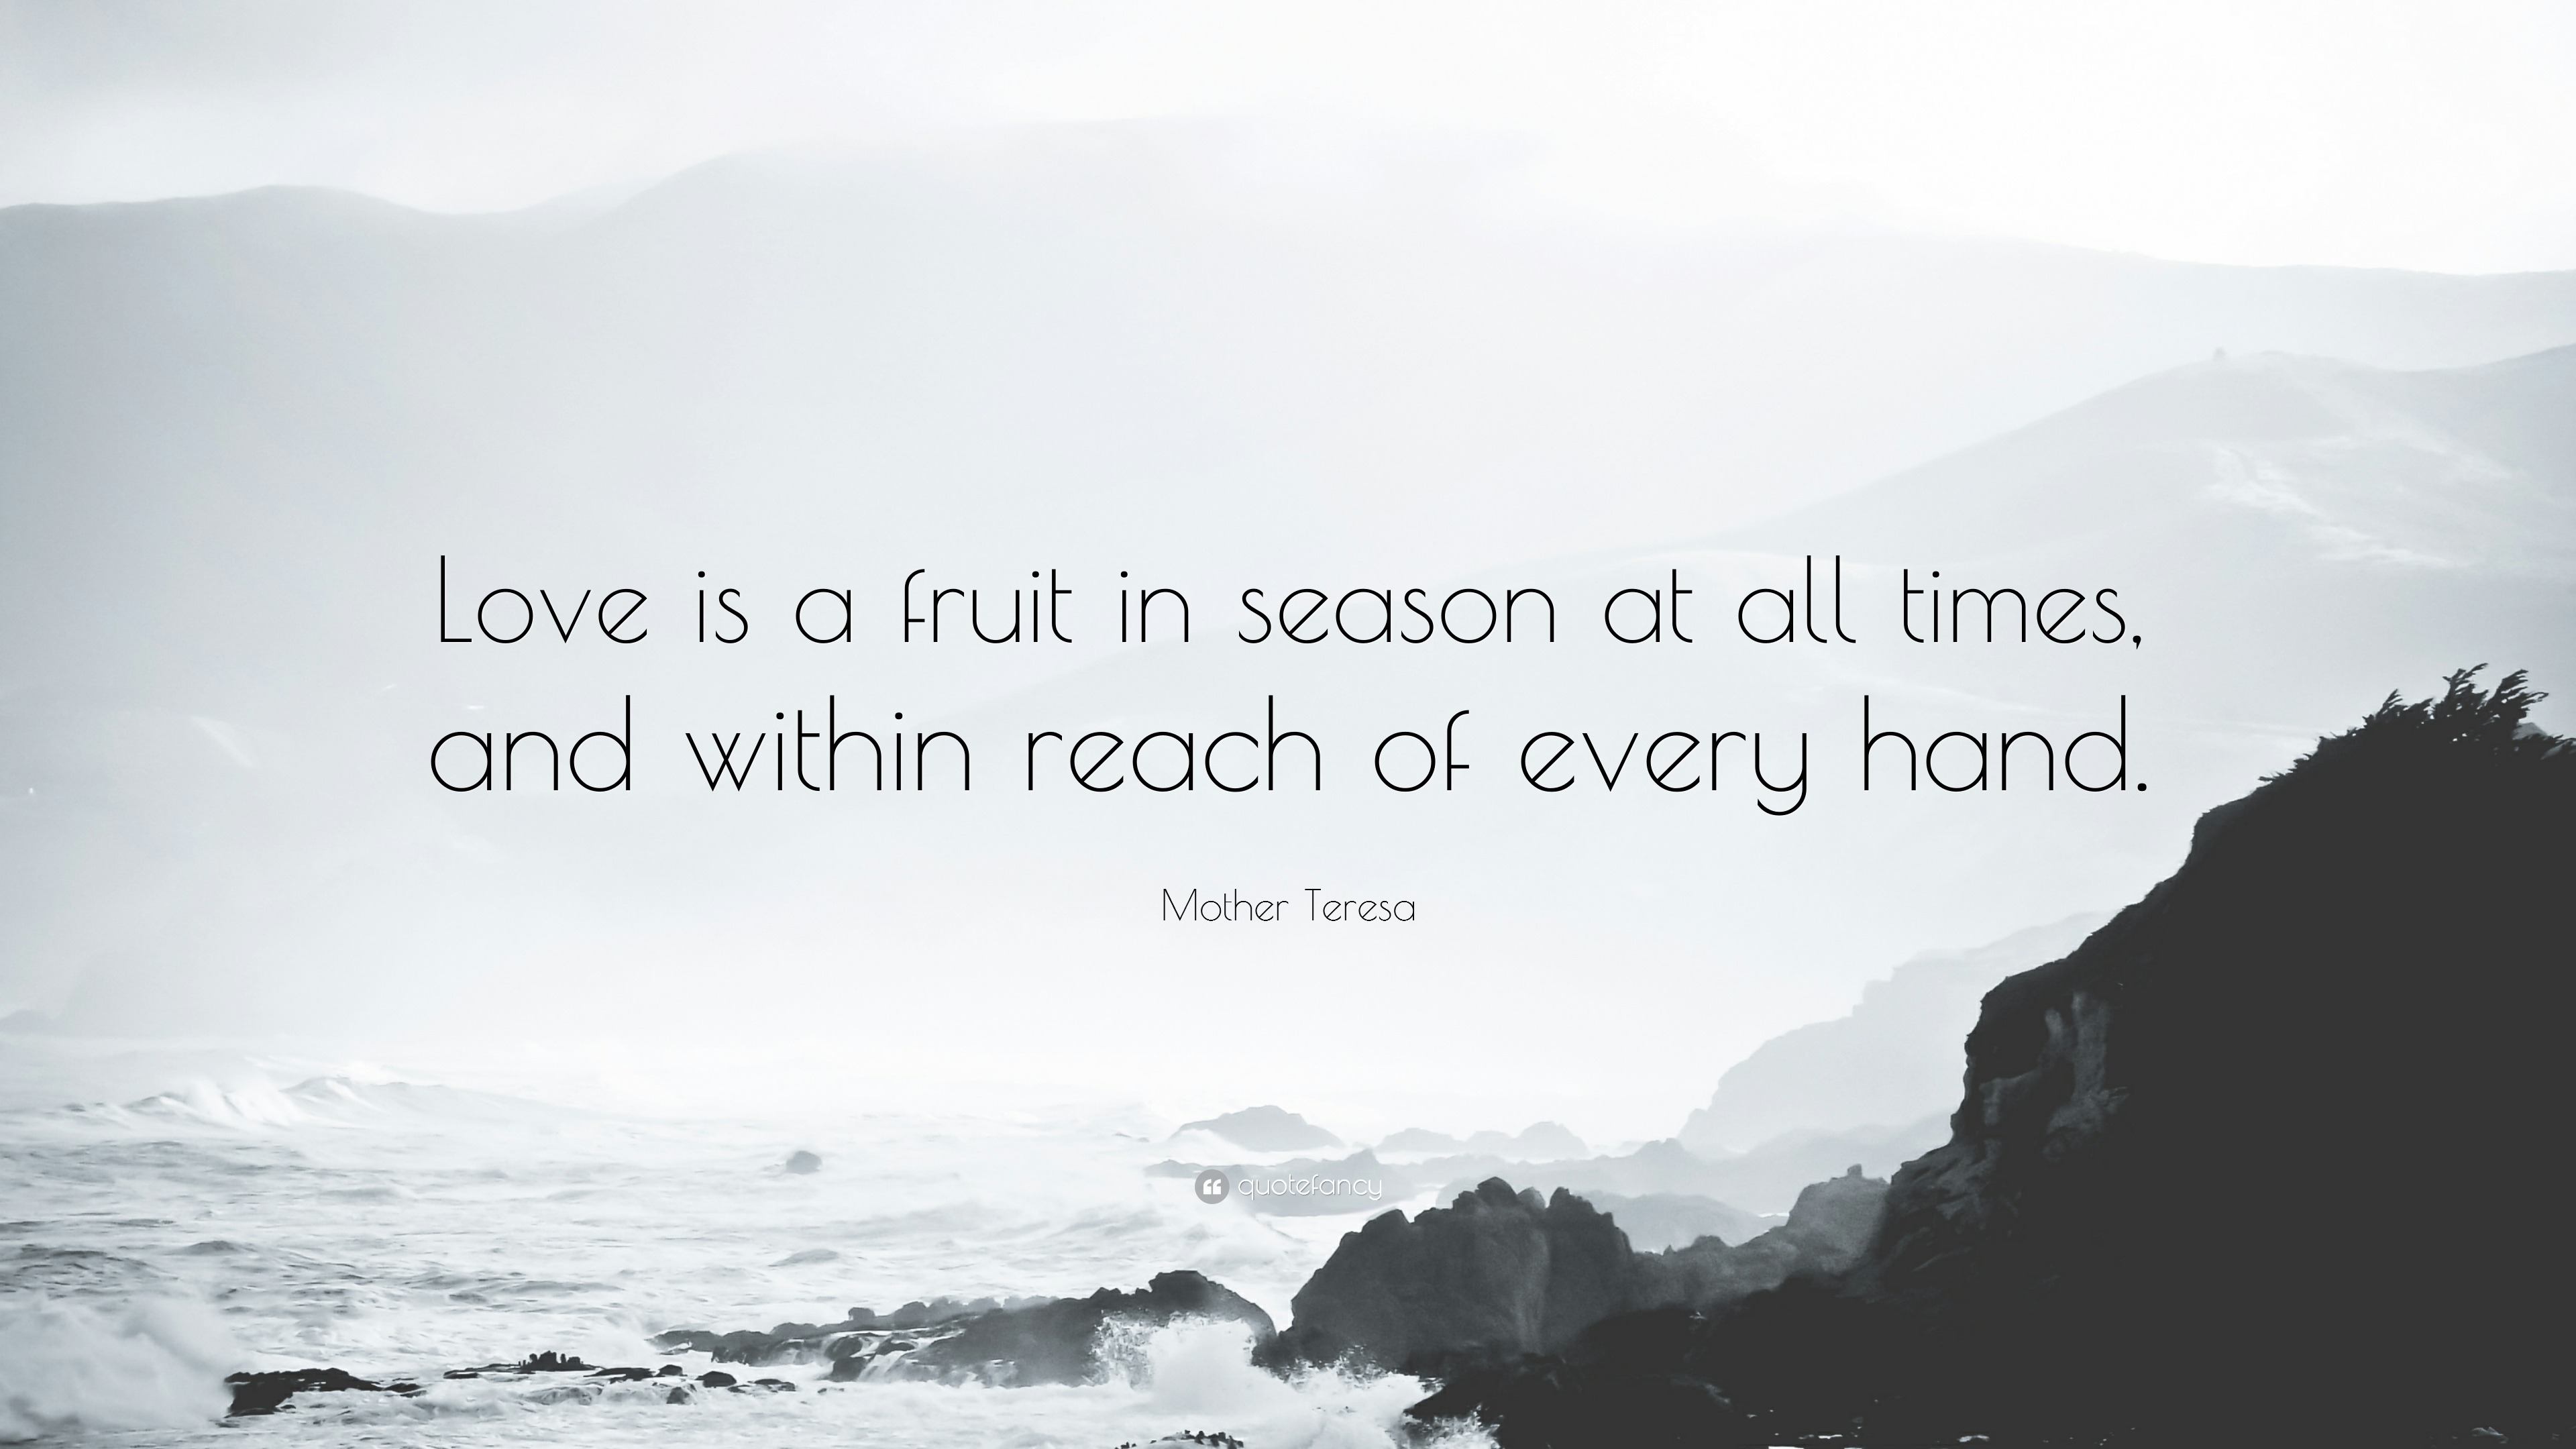 Mother Teresa Quote “Love is a fruit in season at all times and